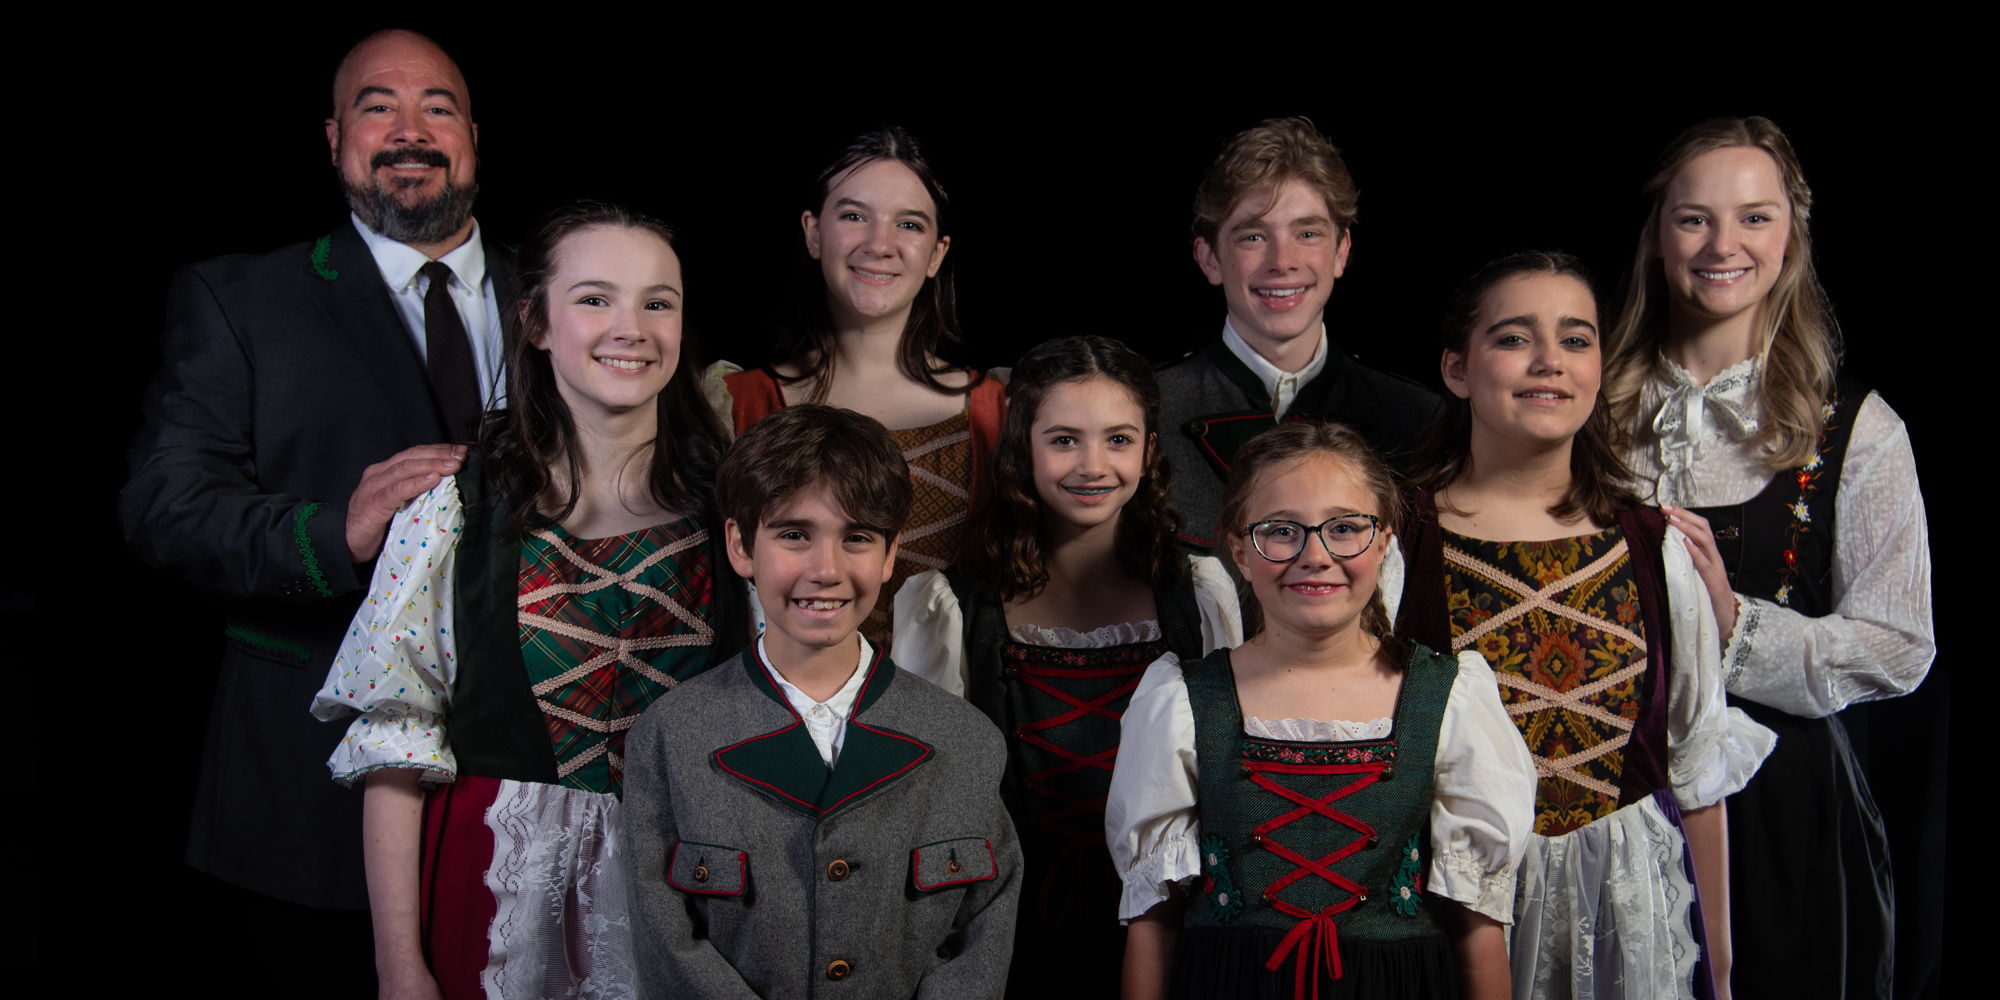 The Sound of Music presented by HPCT promotional image